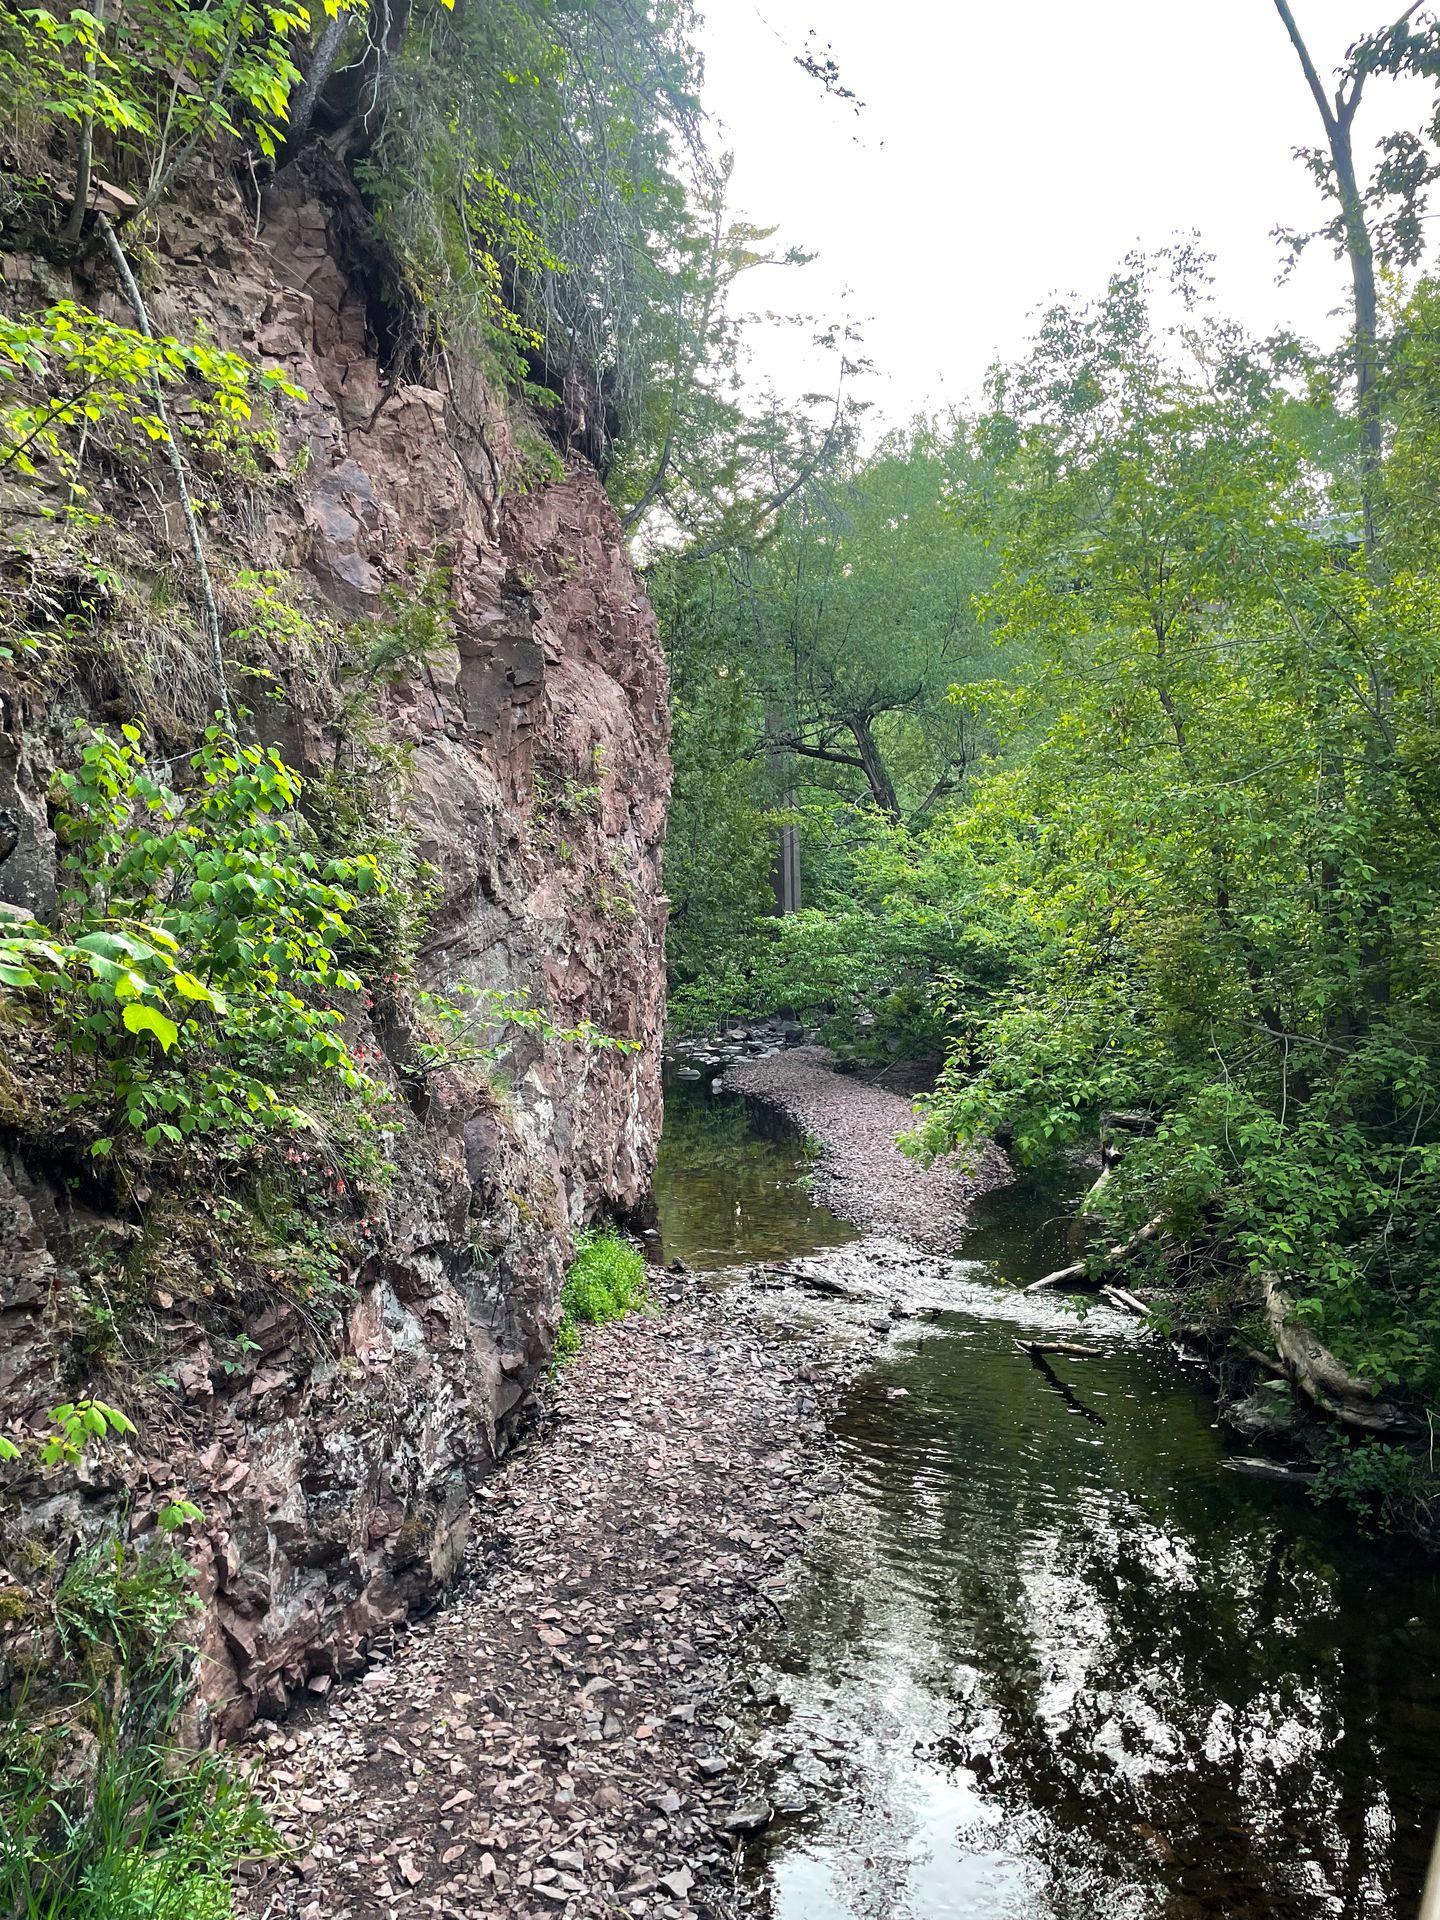 A reddish rock wall extends up next to a shallow creek in Congdon Park